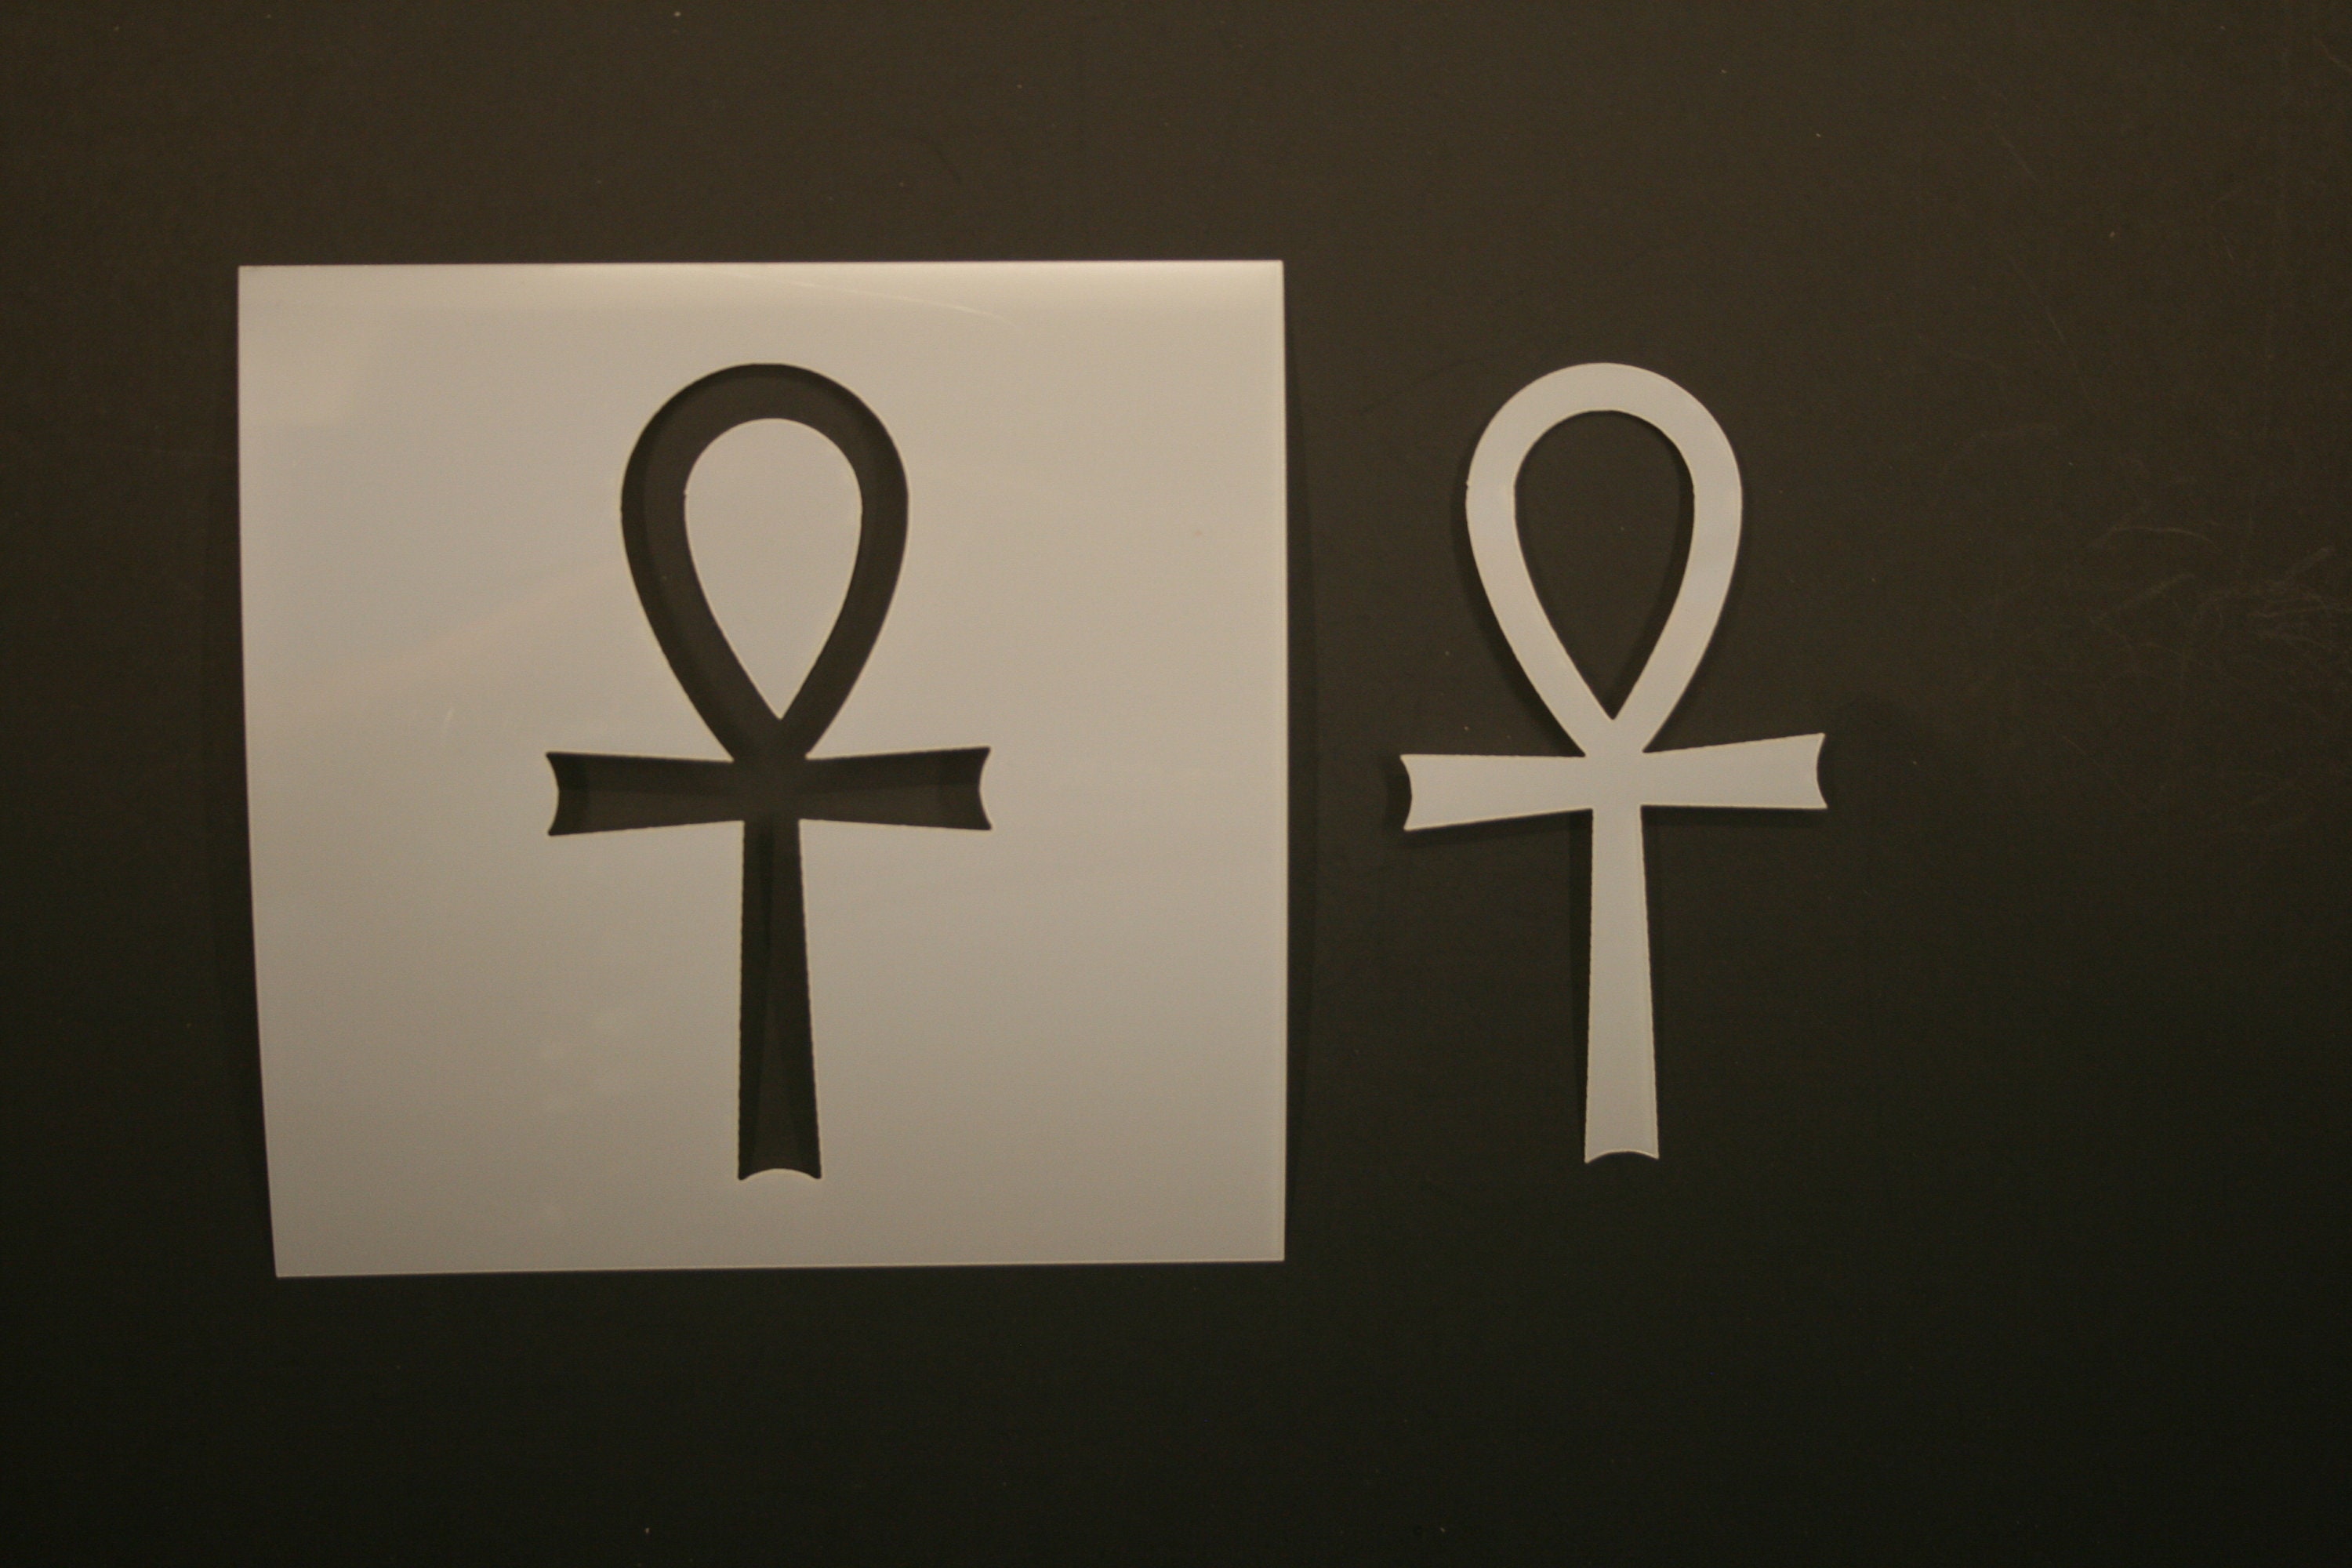 Shape Clipart: Black Ankh or Cross With Tear-shaped Loop 